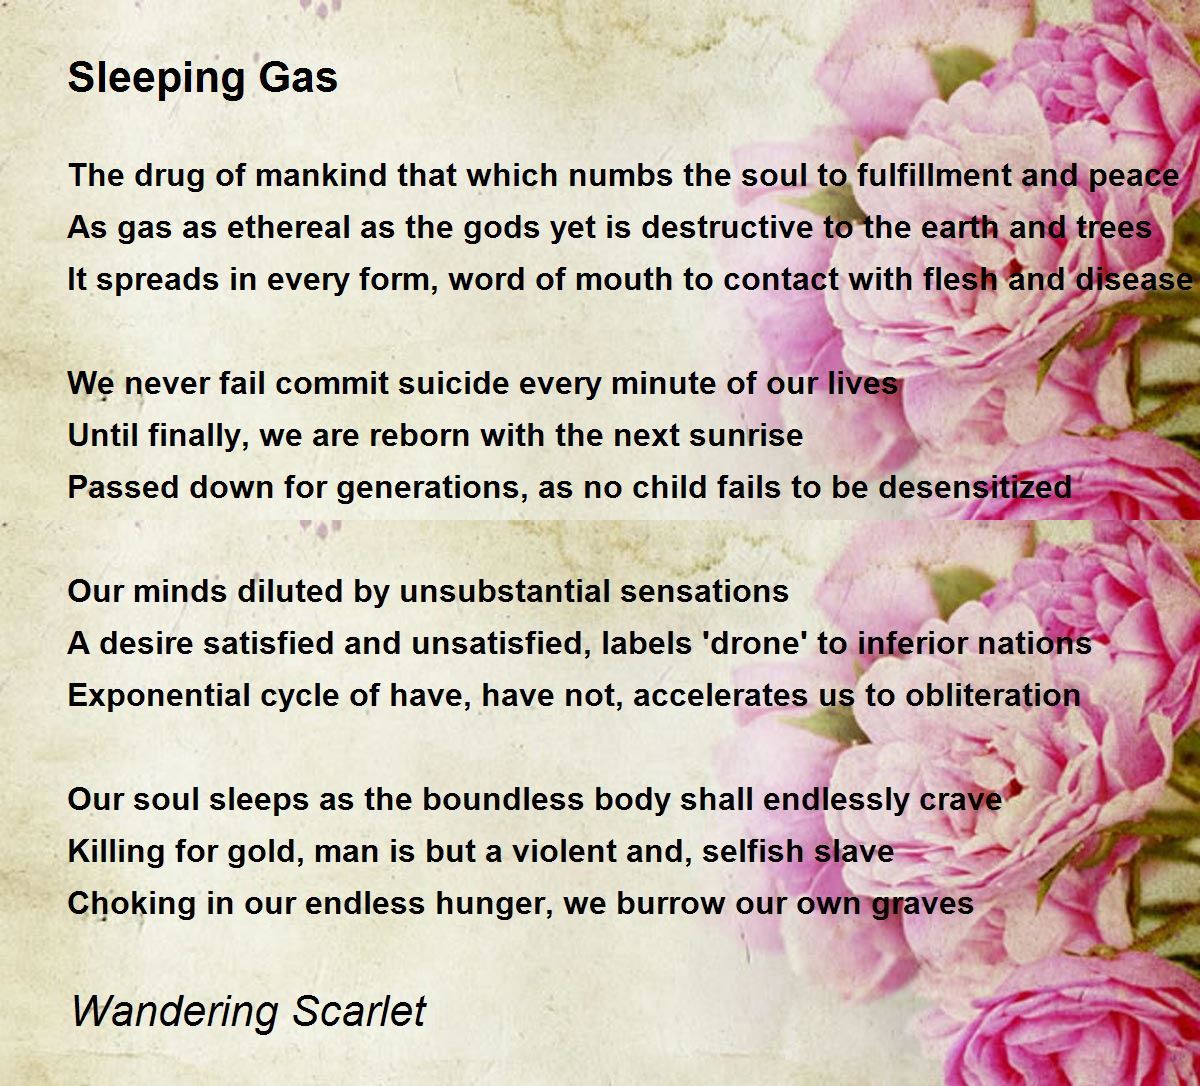 Sleeping Gas poem summary, analysis and comments. 